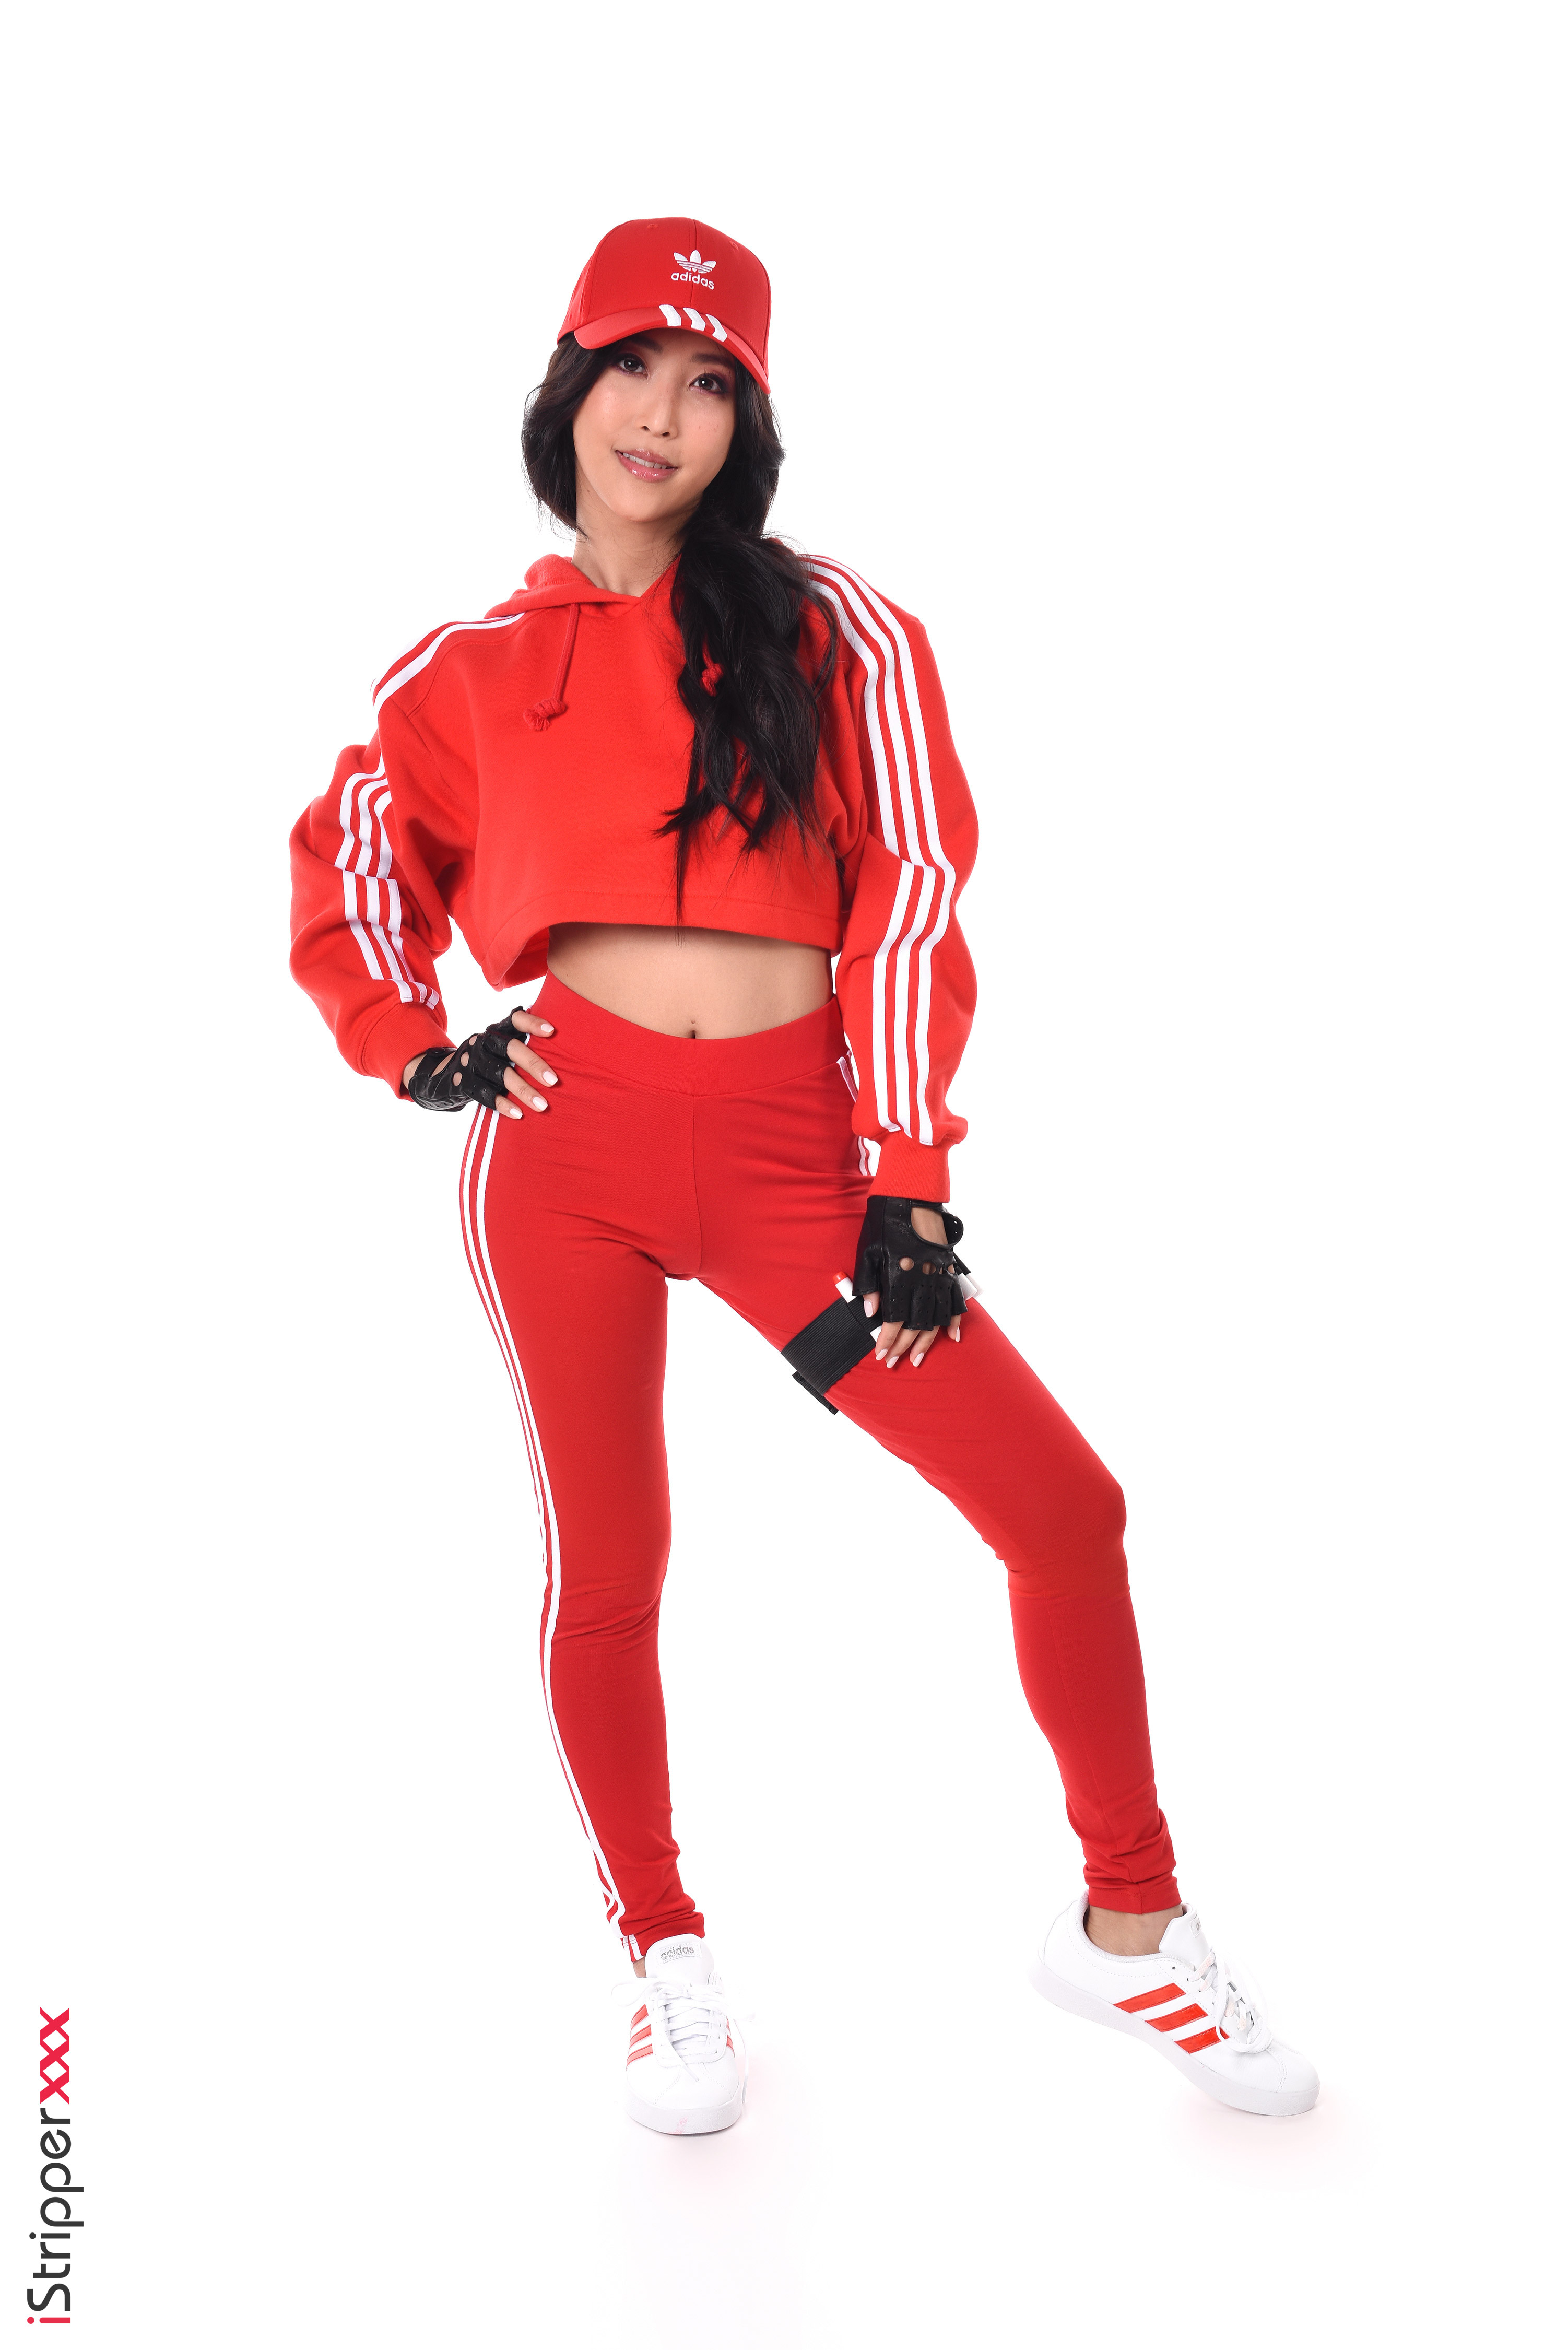 Women Brunette Asian Long Hair Red Pants Red Blouse Leather Gloves Standing White Background Studio  3003x4500